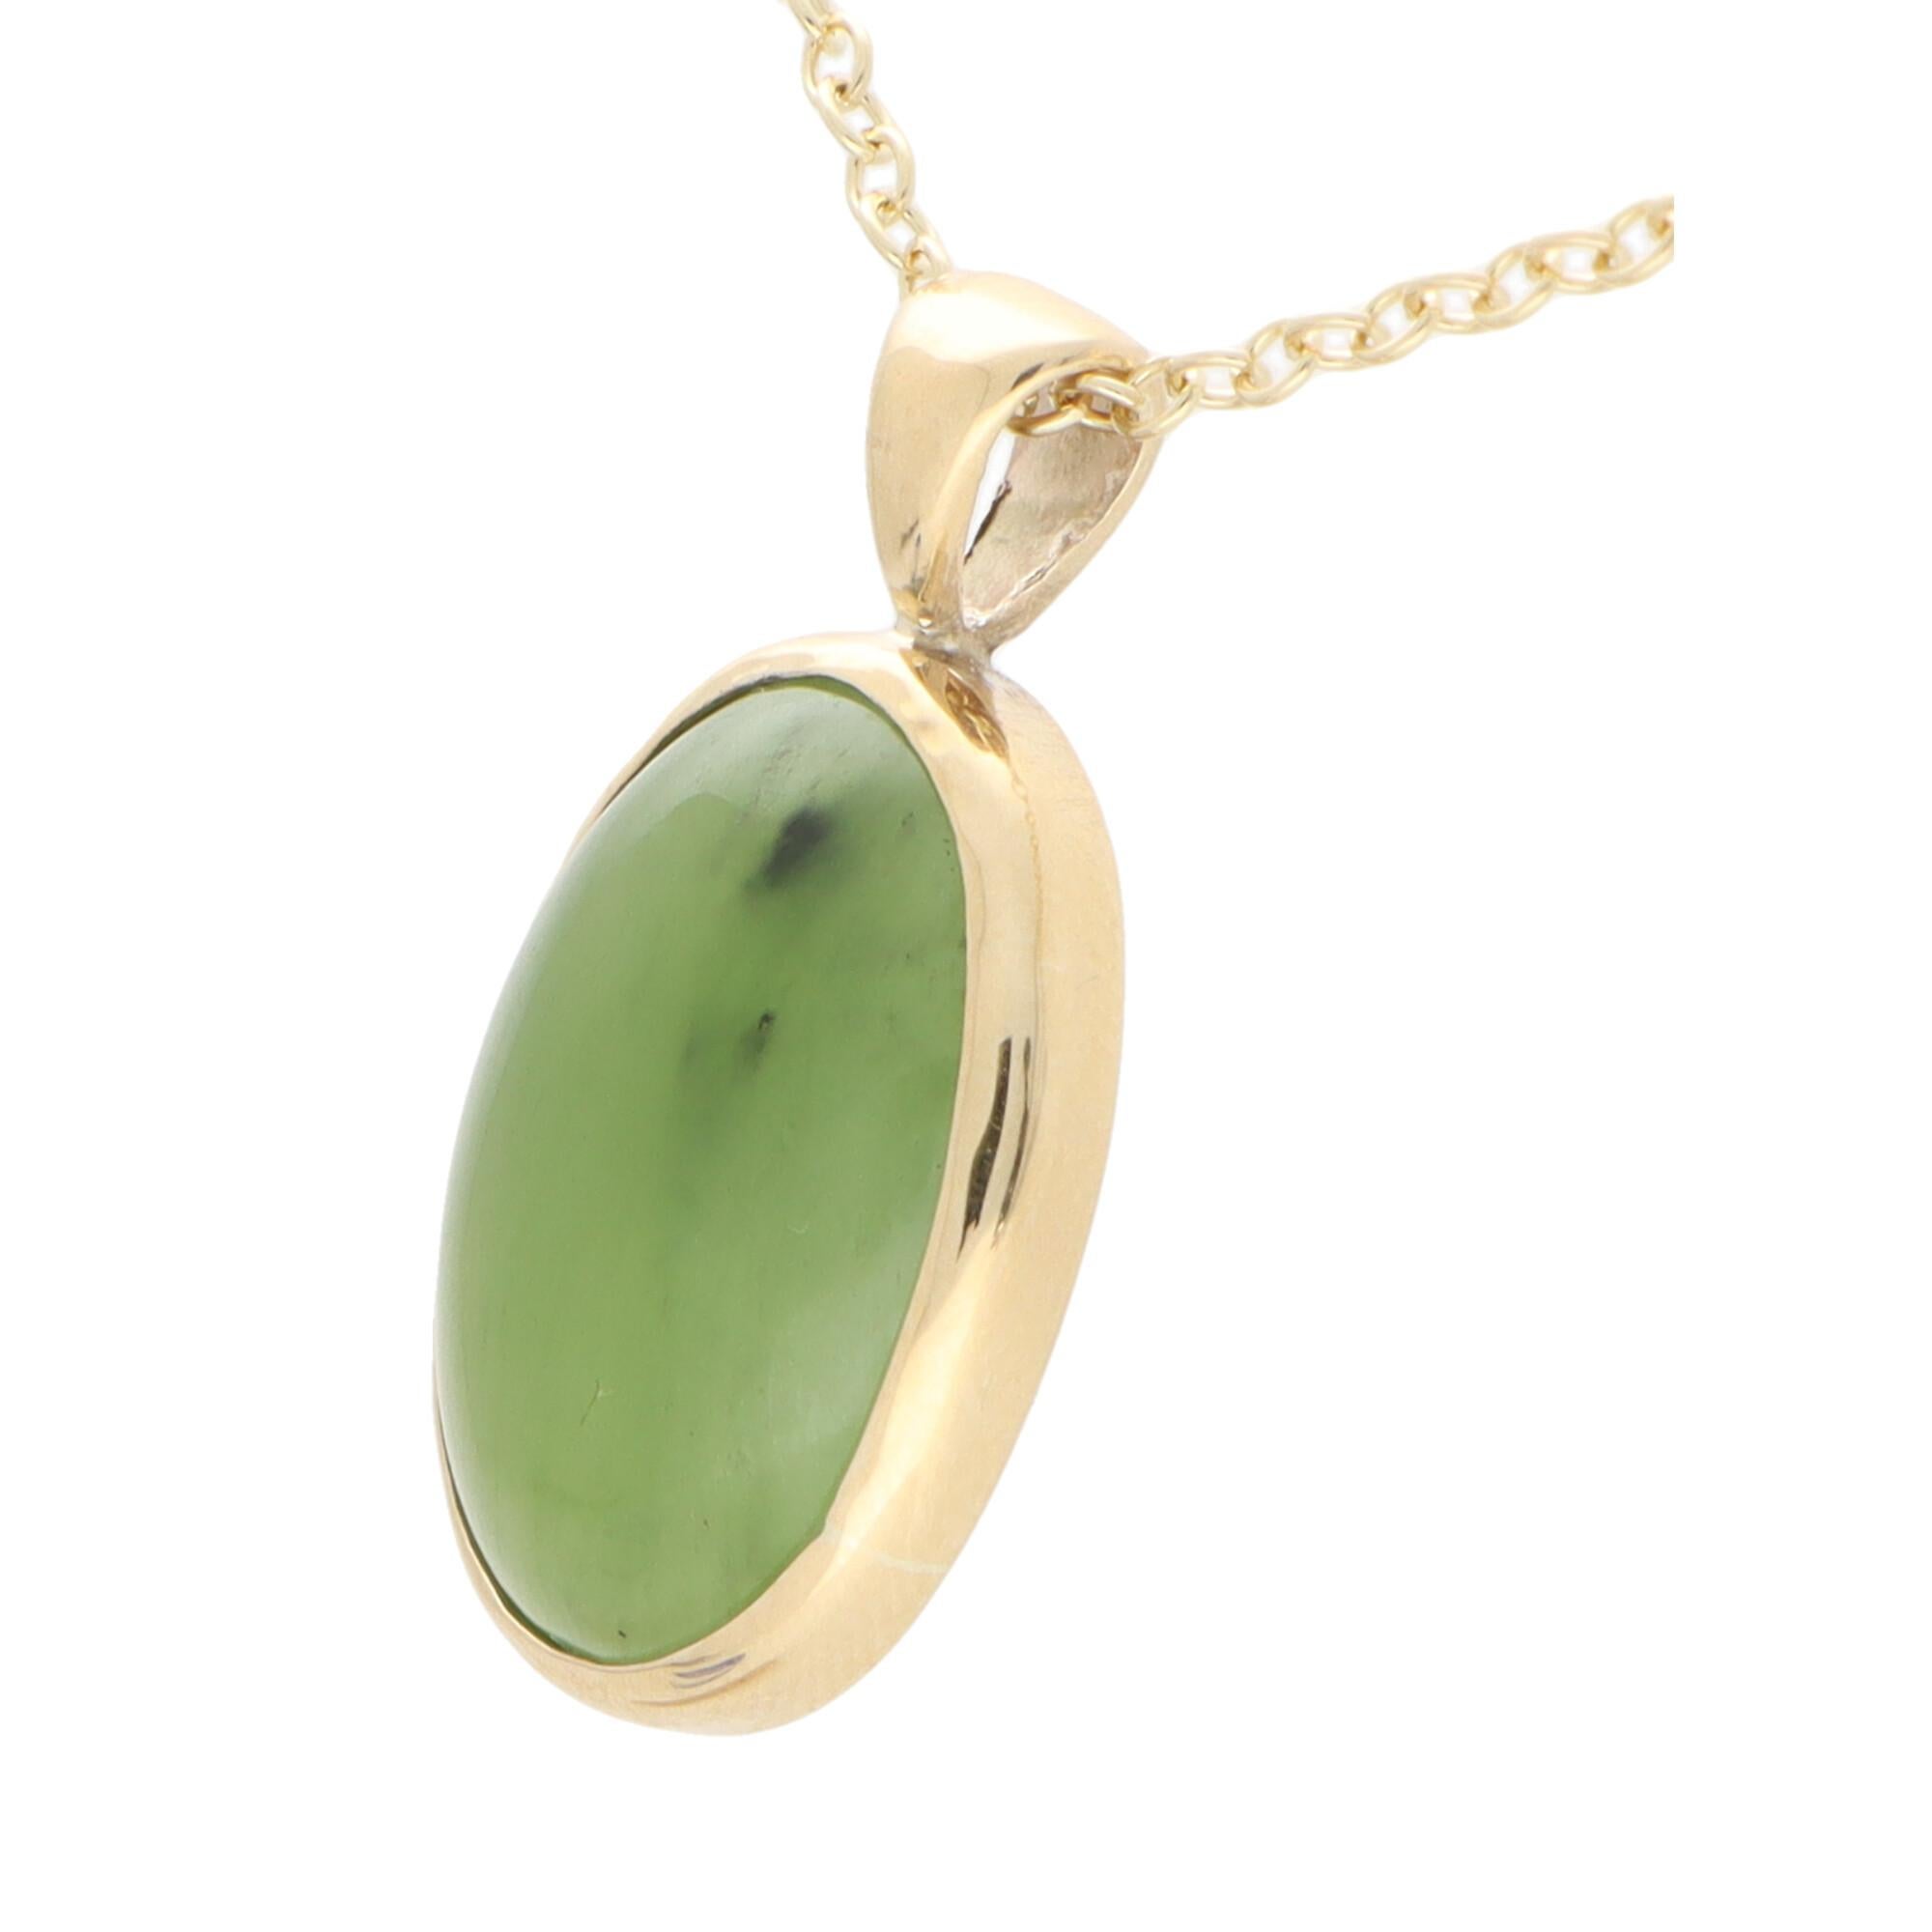 Modern Oval Nephrite Pendant Necklace Set in 9k Yellow Gold